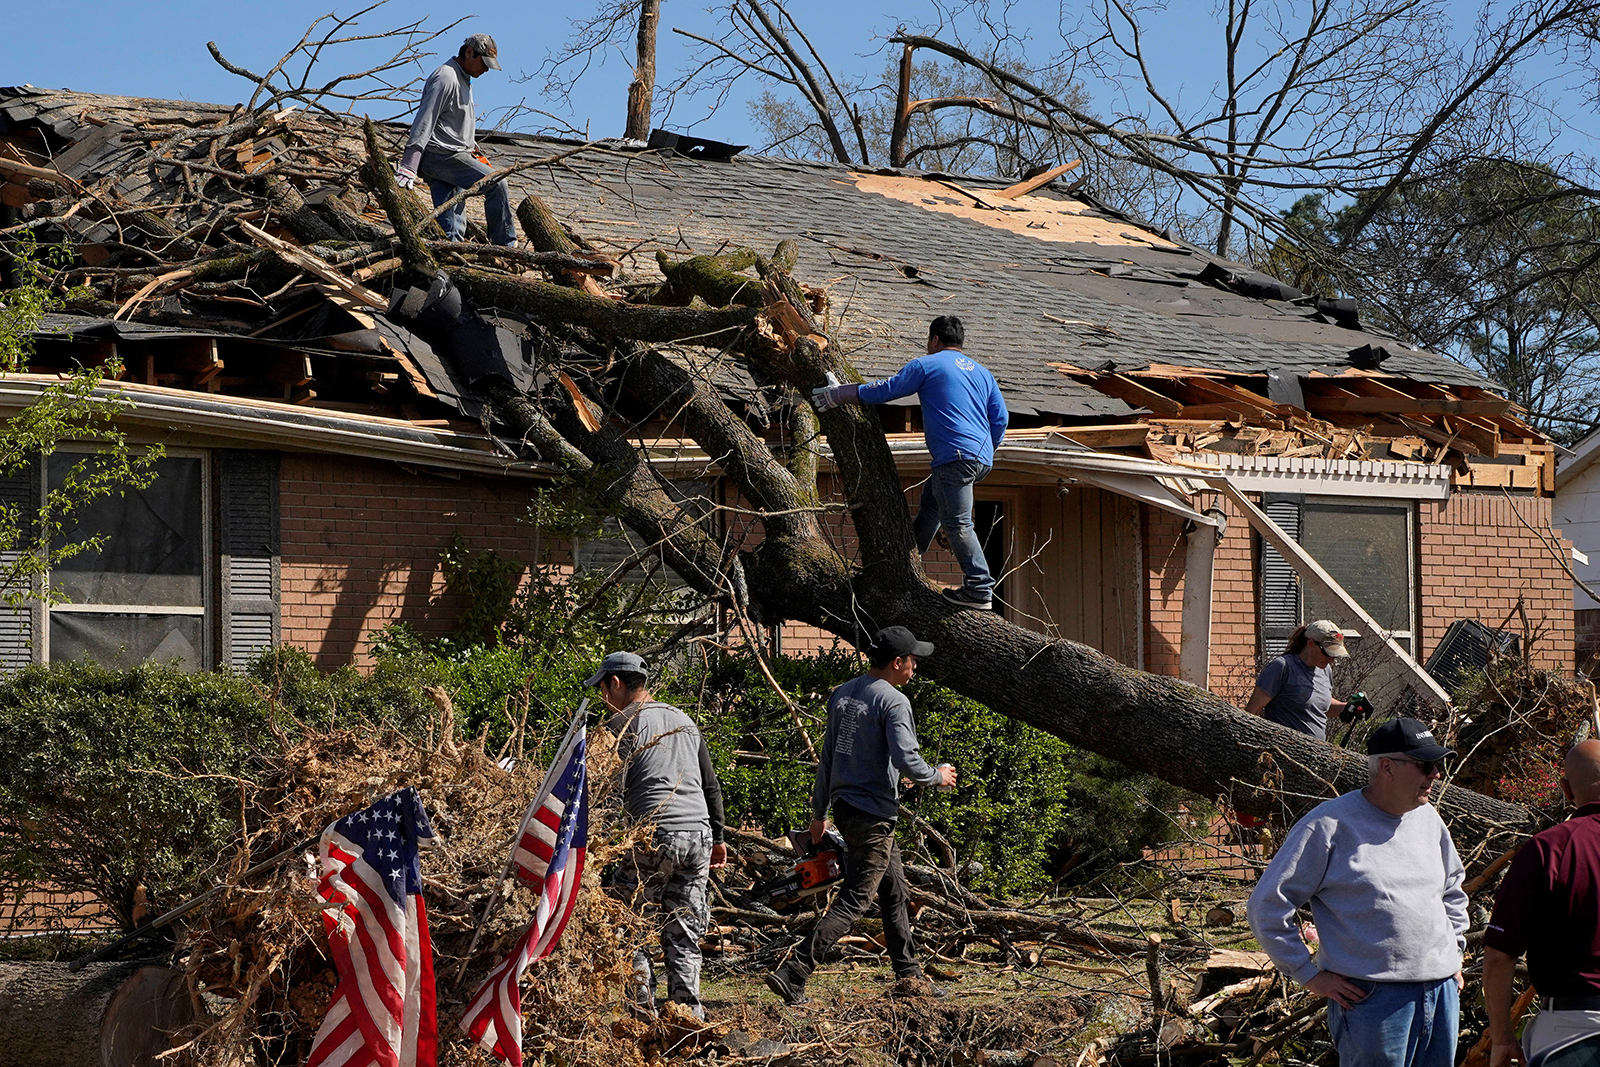 Tornado-ravaged communities look to rebuild after storms level homes and leave 32 dead